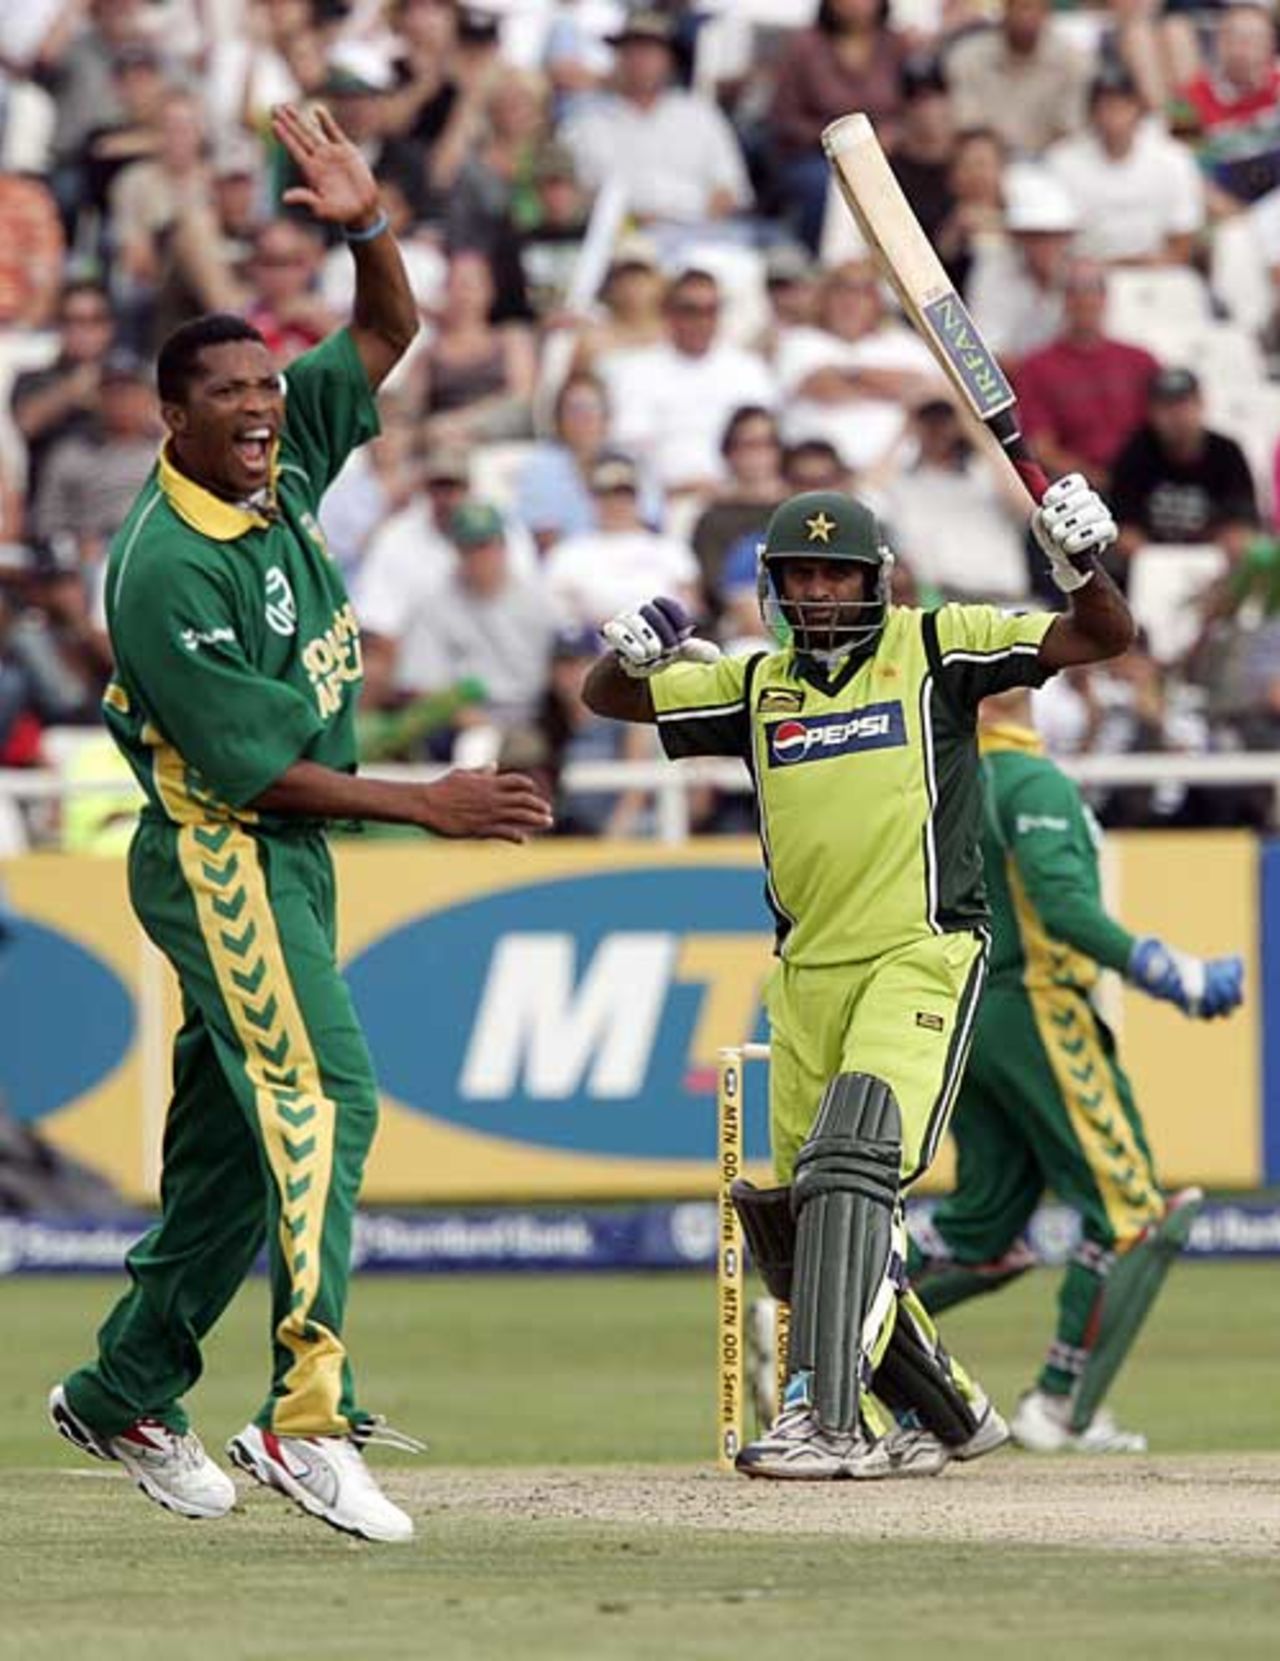 Makhaya Ntini joined the wicket-taking fun with Rana Naved-ul-Hasan's scalp, South Africa v Pakistan, 4th ODI, Cape Town, February 11, 2007